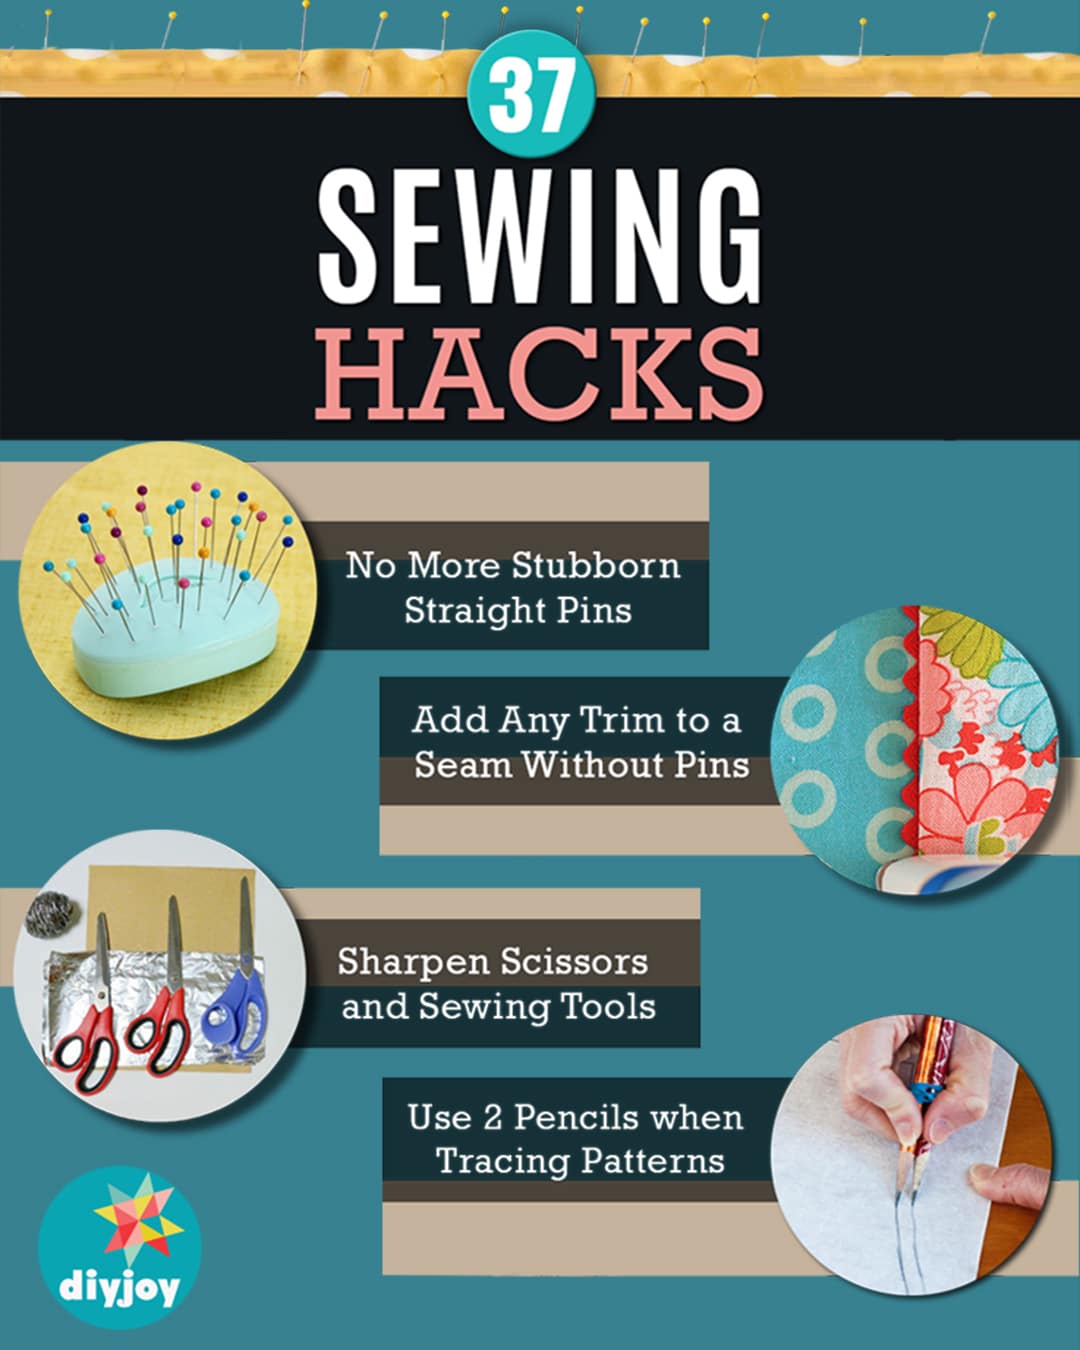 Sewing Hacks | Best Tips and Tricks for Sewing Patterns, Projects, Machines, Hand Sewn Items. Clever Ideas for Beginners and Even Experts | Use Mini Clothespins when Sewing Bindings and Piping |